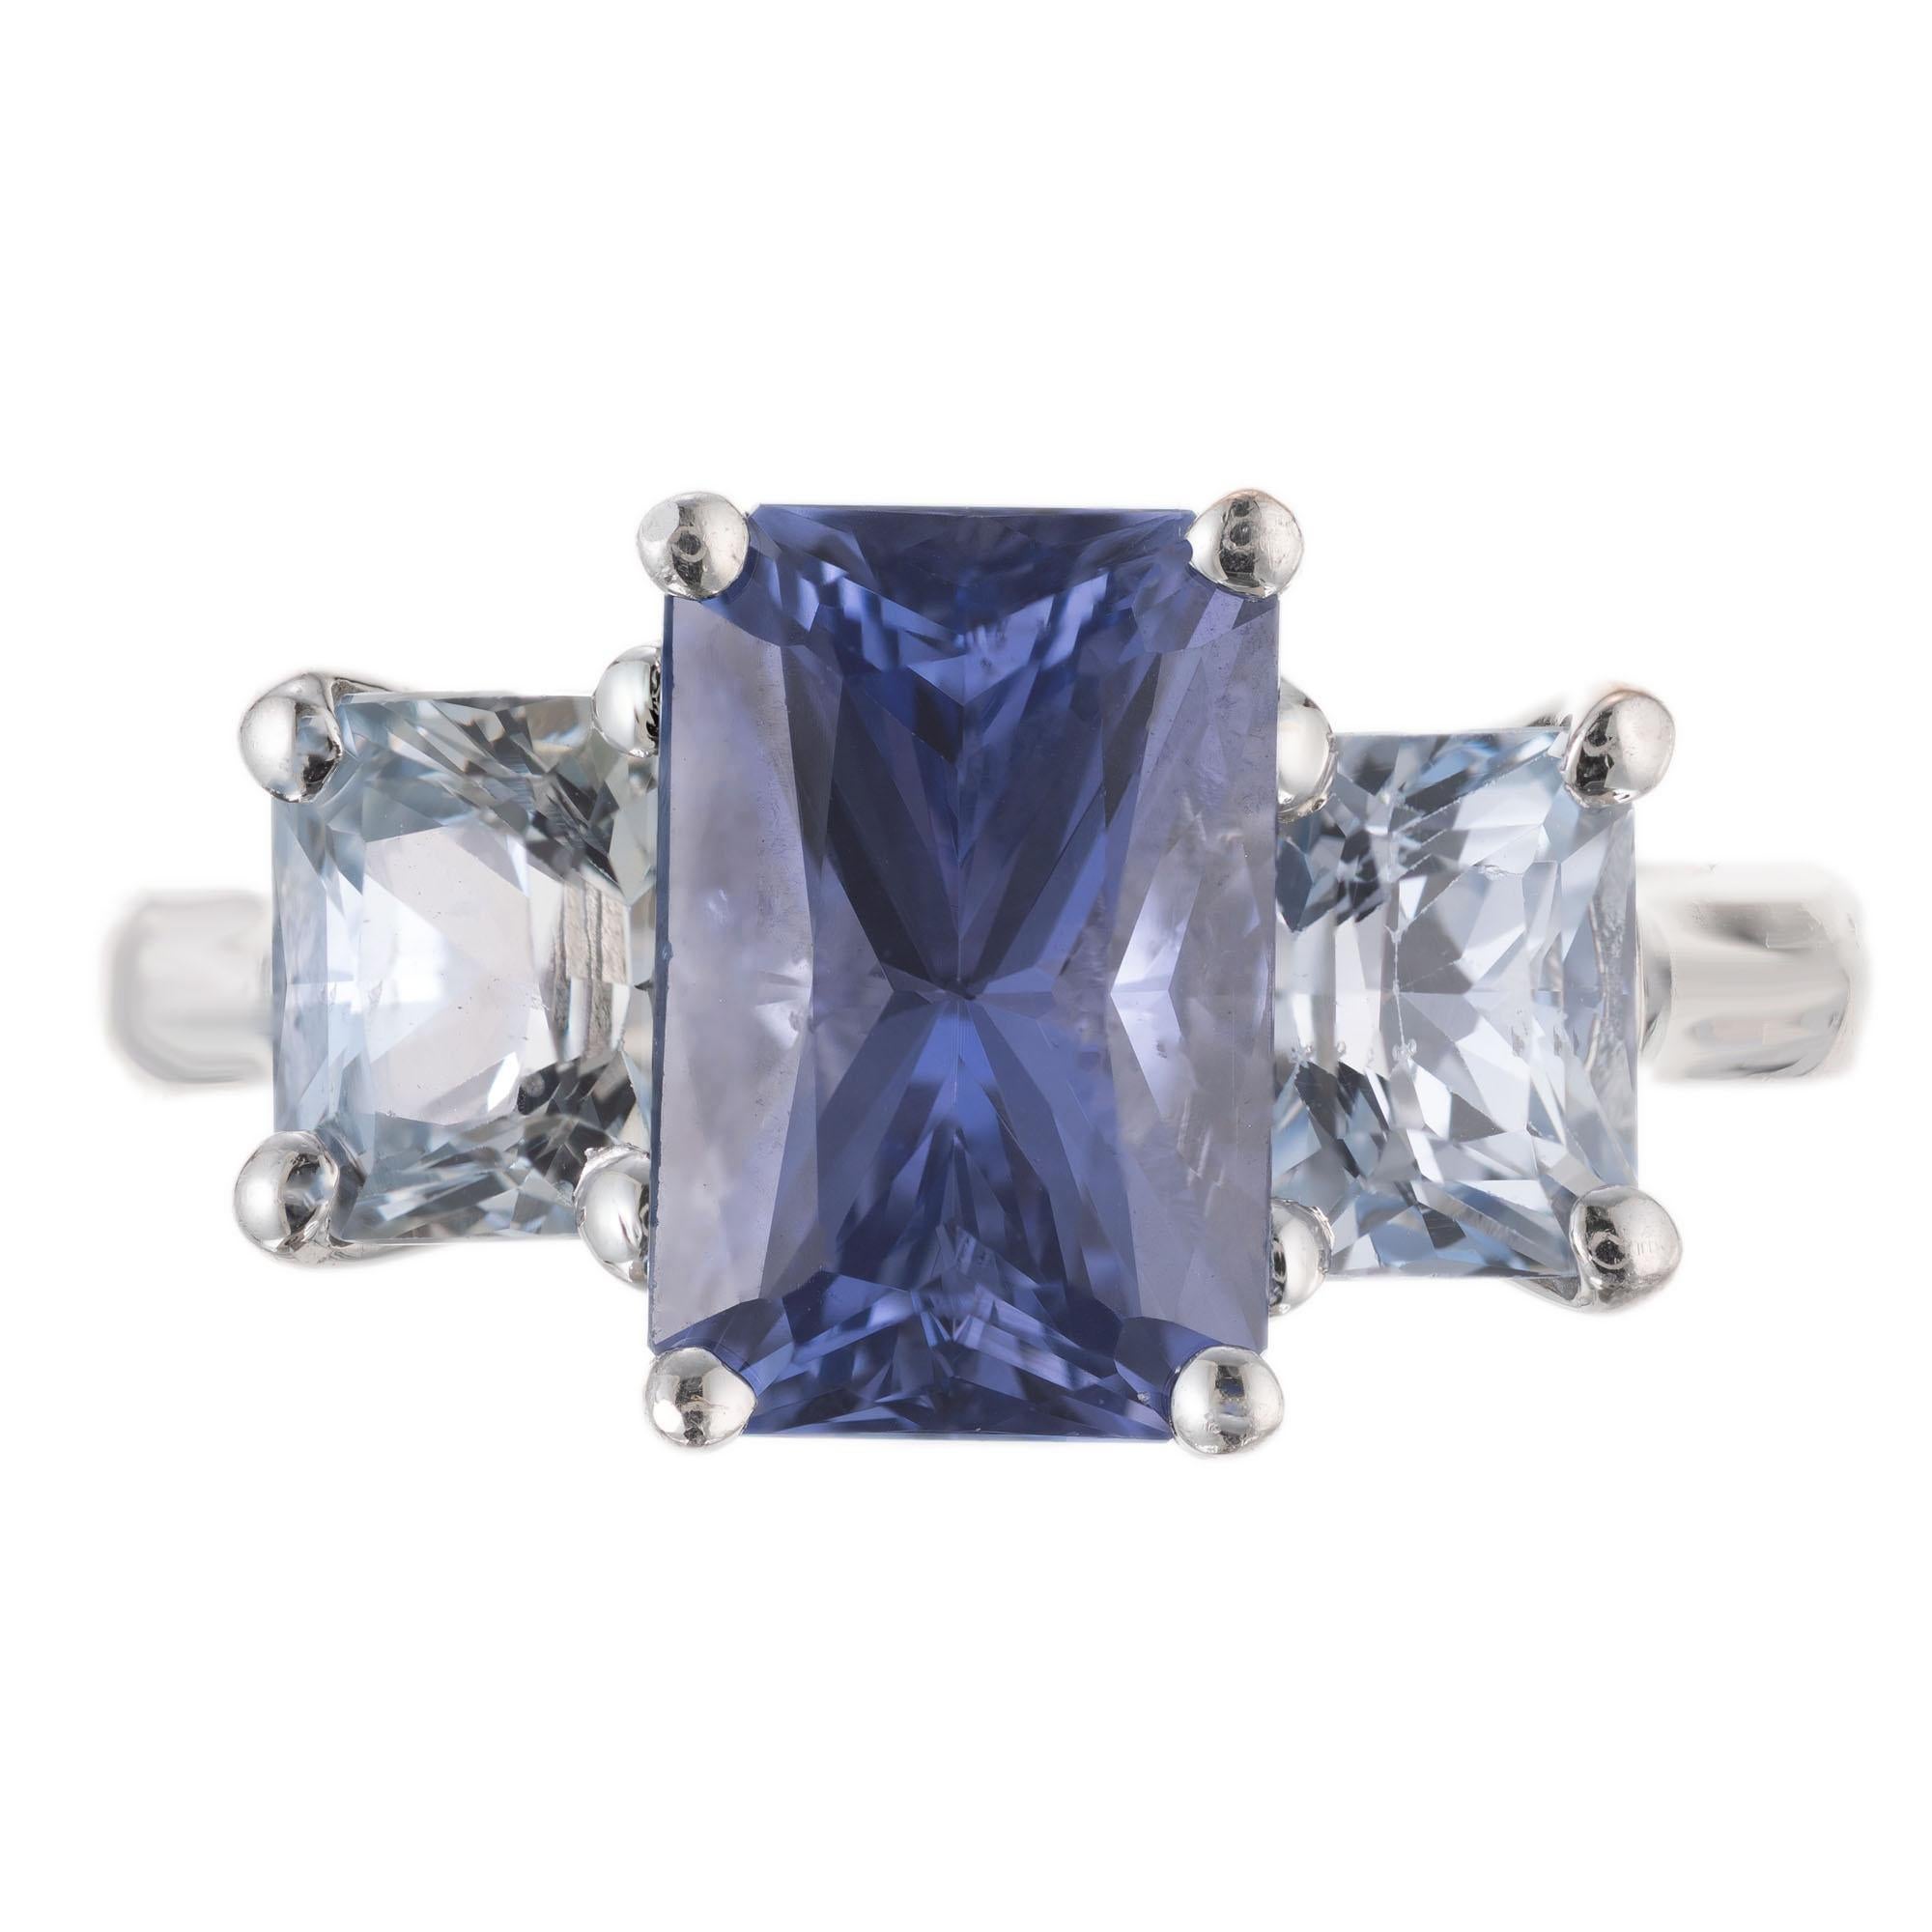 Sapphire Three-stone engagement ring. GIA certified 3.47cts octagonal center sapphire, mounted in a platinum three-stone setting, accented with a light blue octagonal sapphire on each side of the stone. All three stones are GIA certified. This is a